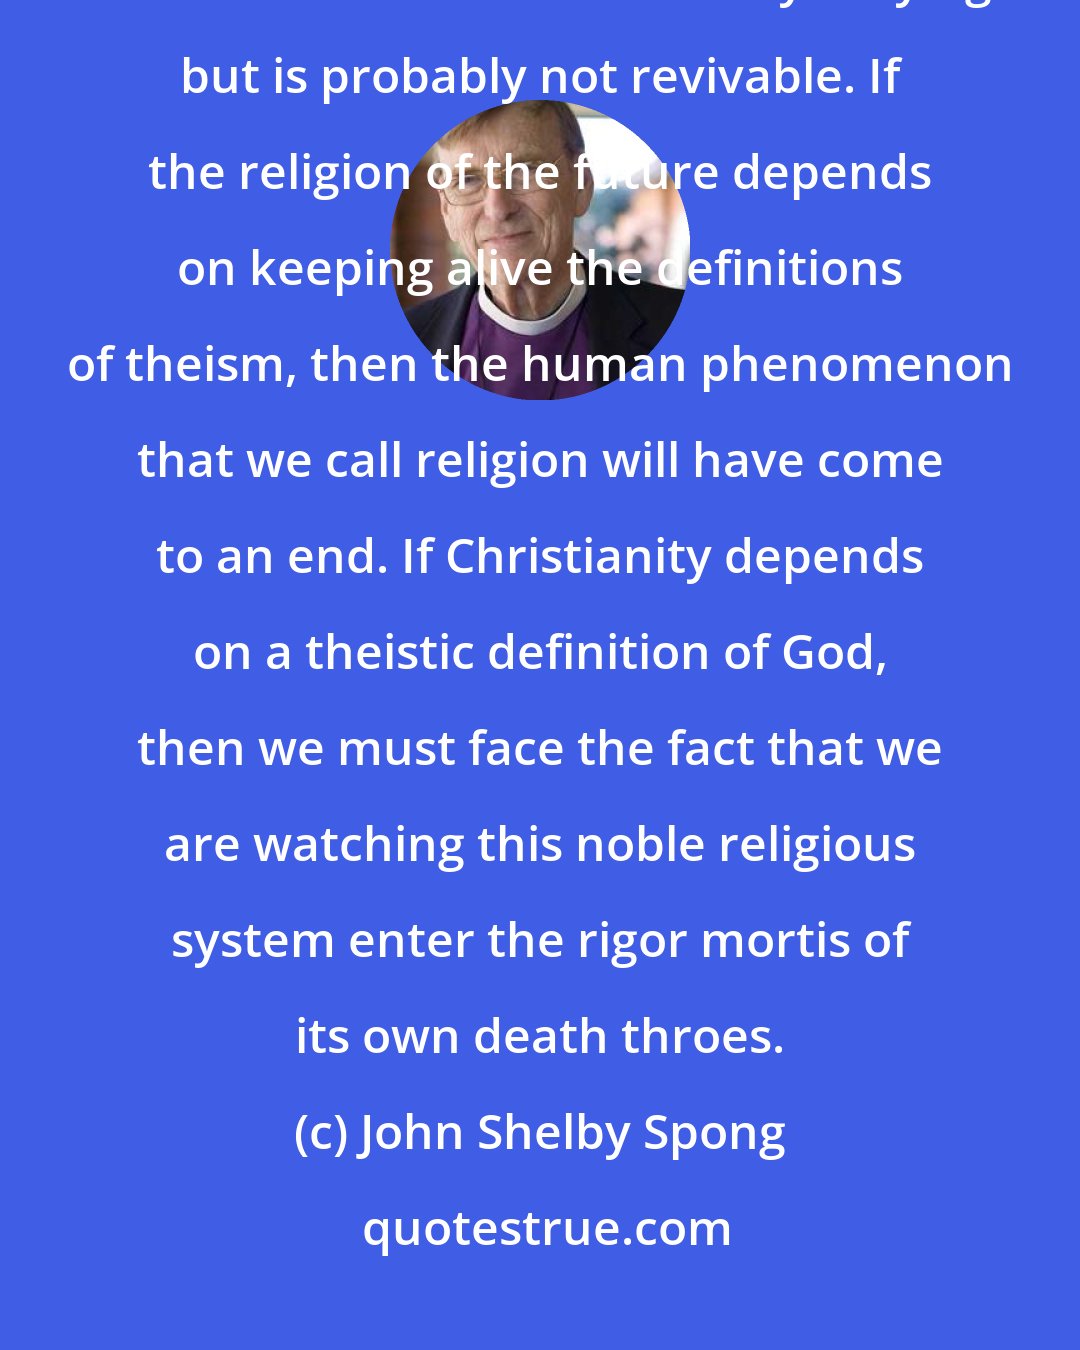 John Shelby Spong: Theism, as a way of conceiving God, has become demonstrably inadequate, and the God of theism not only is dying but is probably not revivable. If the religion of the future depends on keeping alive the definitions of theism, then the human phenomenon that we call religion will have come to an end. If Christianity depends on a theistic definition of God, then we must face the fact that we are watching this noble religious system enter the rigor mortis of its own death throes.